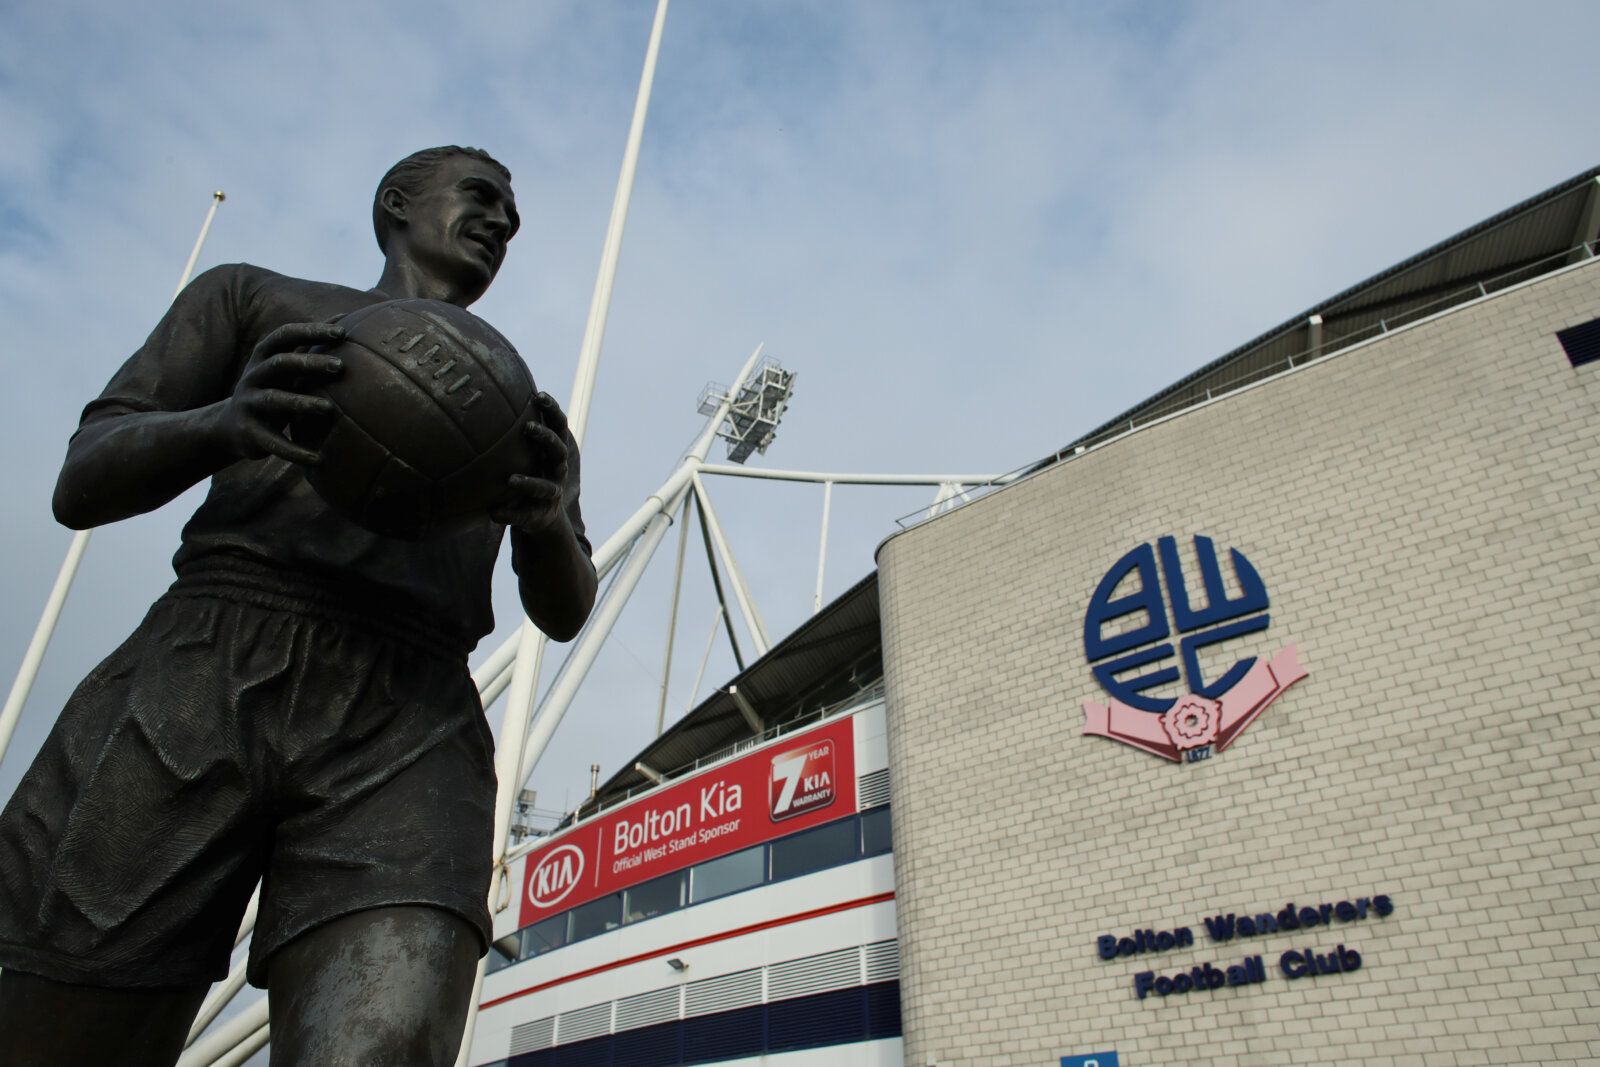 Soccer Football - League One - Bolton Wanderers v Milton Keynes Dons - University of Bolton Stadium, Bolton, Britain - November 16, 2019   General view of the Nat Lofthouse statue outside the stadium before the match    Action Images/John Clifton    EDITORIAL USE ONLY. No use with unauthorized audio, video, data, fixture lists, club/league logos or 